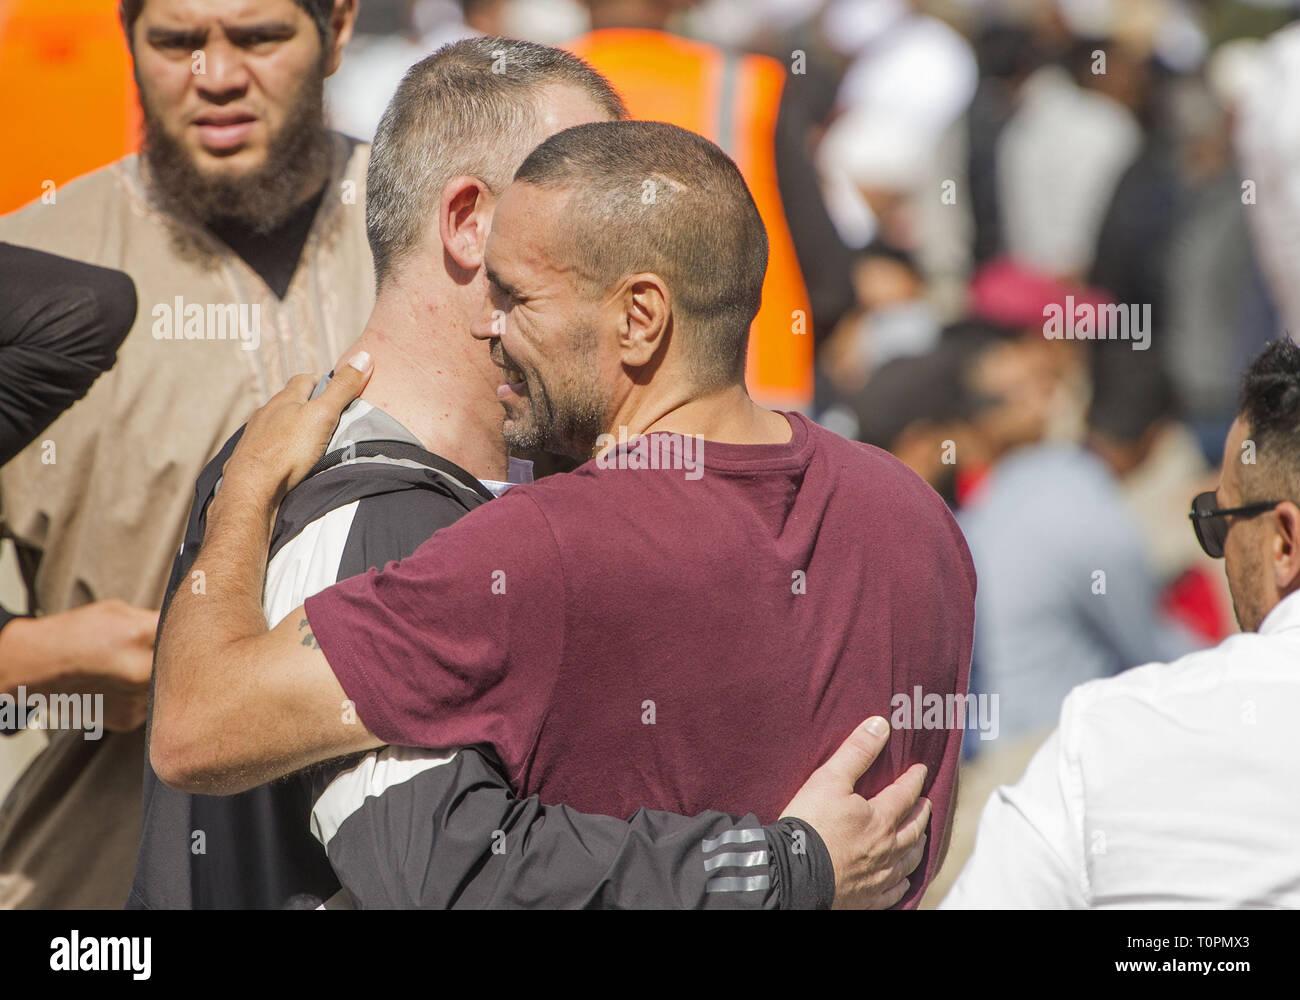 Christchurch, Canterbury, New Zealand. 22nd Mar, 2019. Anthony Mundine, an Australian professional boxer and former rugby league footballer, attends a Call to Prayer service in Hagley Park, across the street from the Al Noor mosque. The event drew thousands of Muslims and other community members. In addition to prayers and a brief talk from the imam of Al Noor, two minutes of silence were observed nationwide in memory of the 50 people slain at the Al Noor and Linwood mosques one week ago. Later in the day, 26 of the victims were scheduled to be buried at Memorial Park Cemetery. (Credit Imag Stock Photo